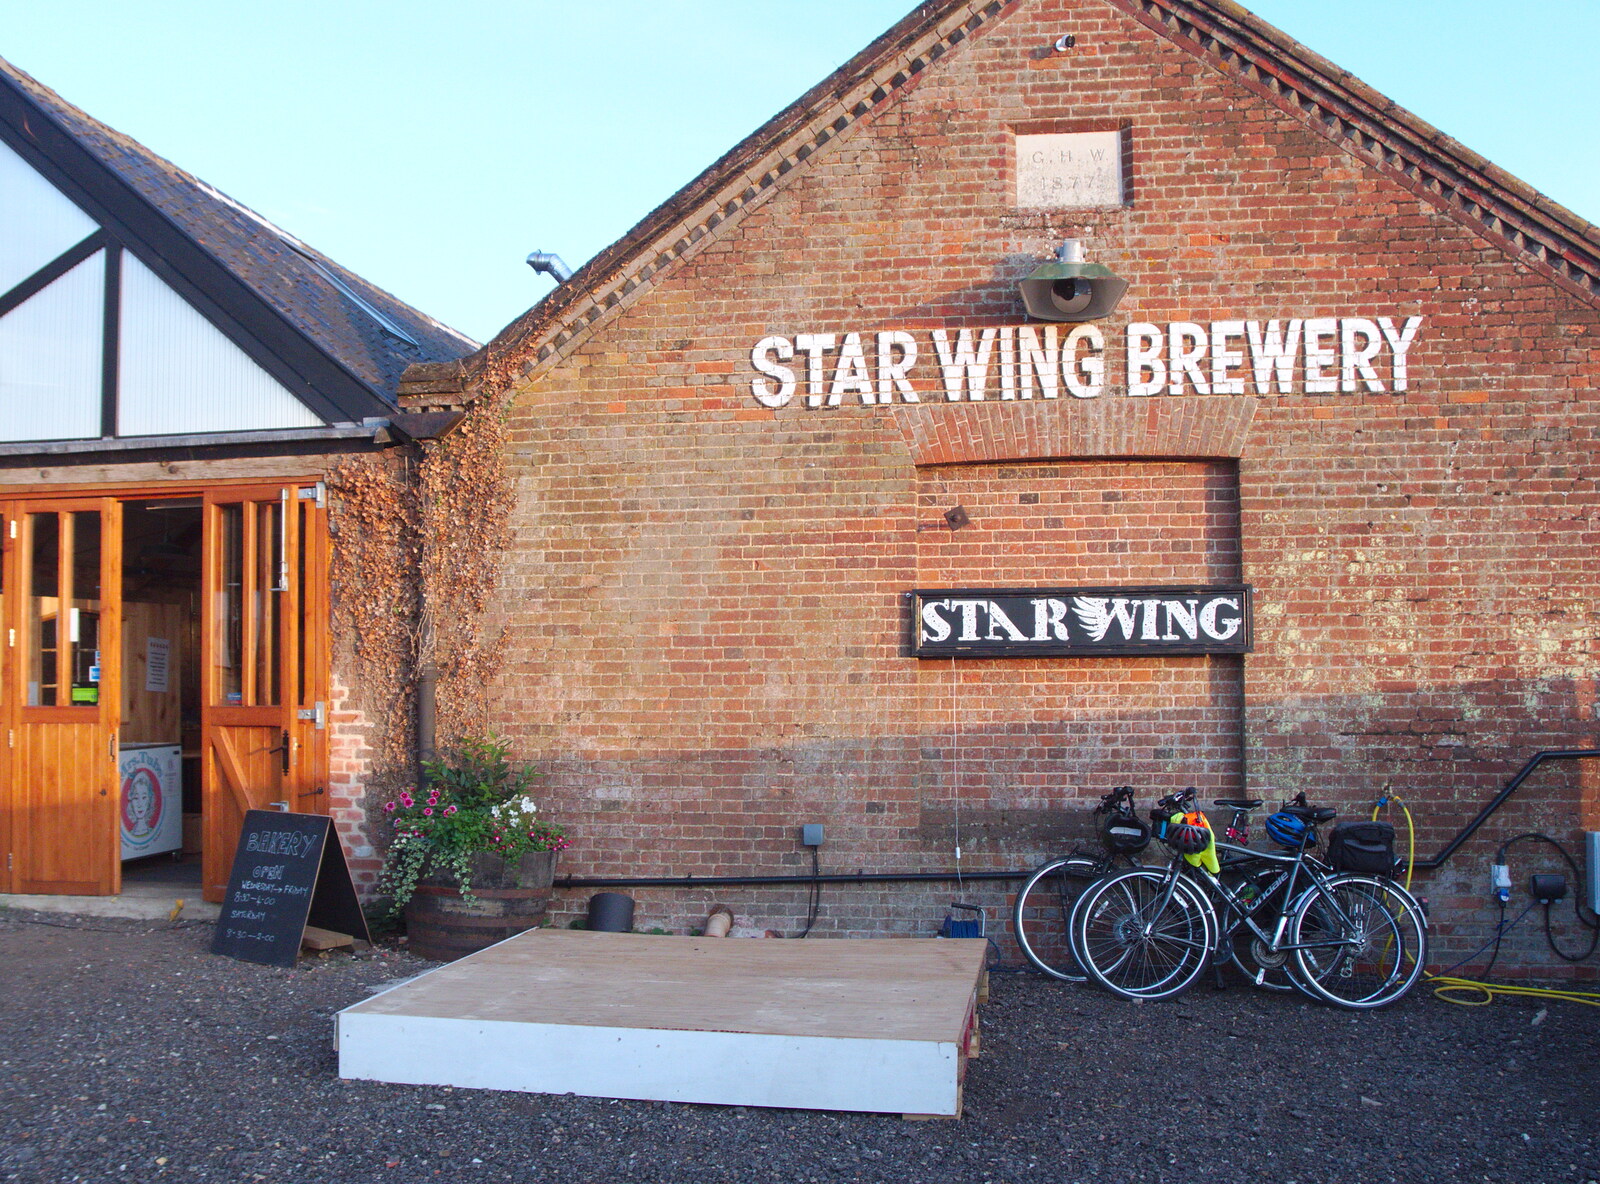 The Star Wing tap room, and our bikes from Up on the Roof: a Hydroponic City Farm, Kingdom Street, Paddington - 3rd September 2019